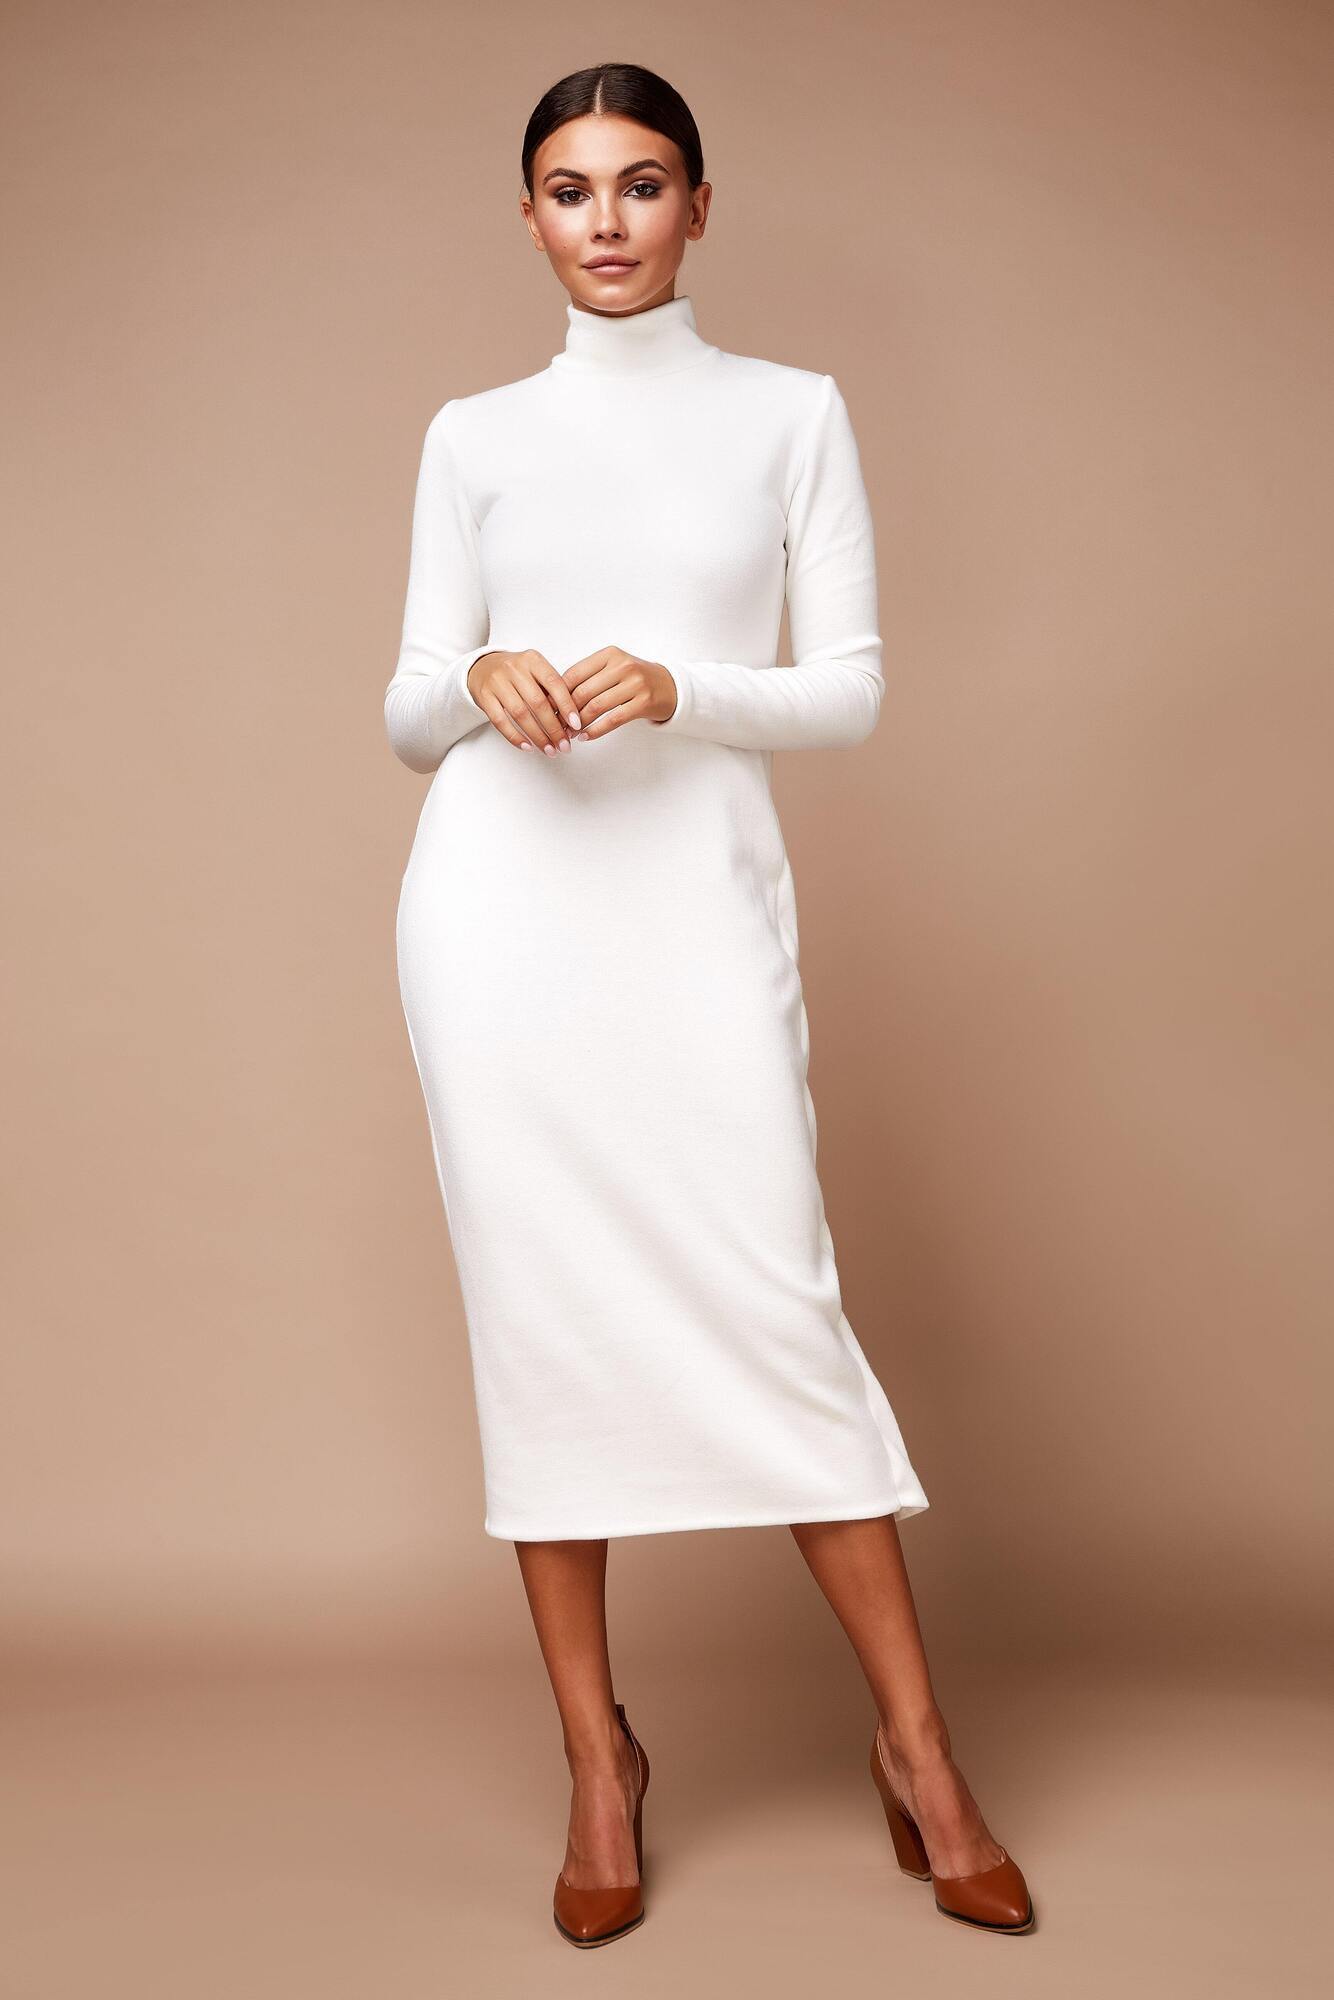 Chic appearance with a turtleneck dress.